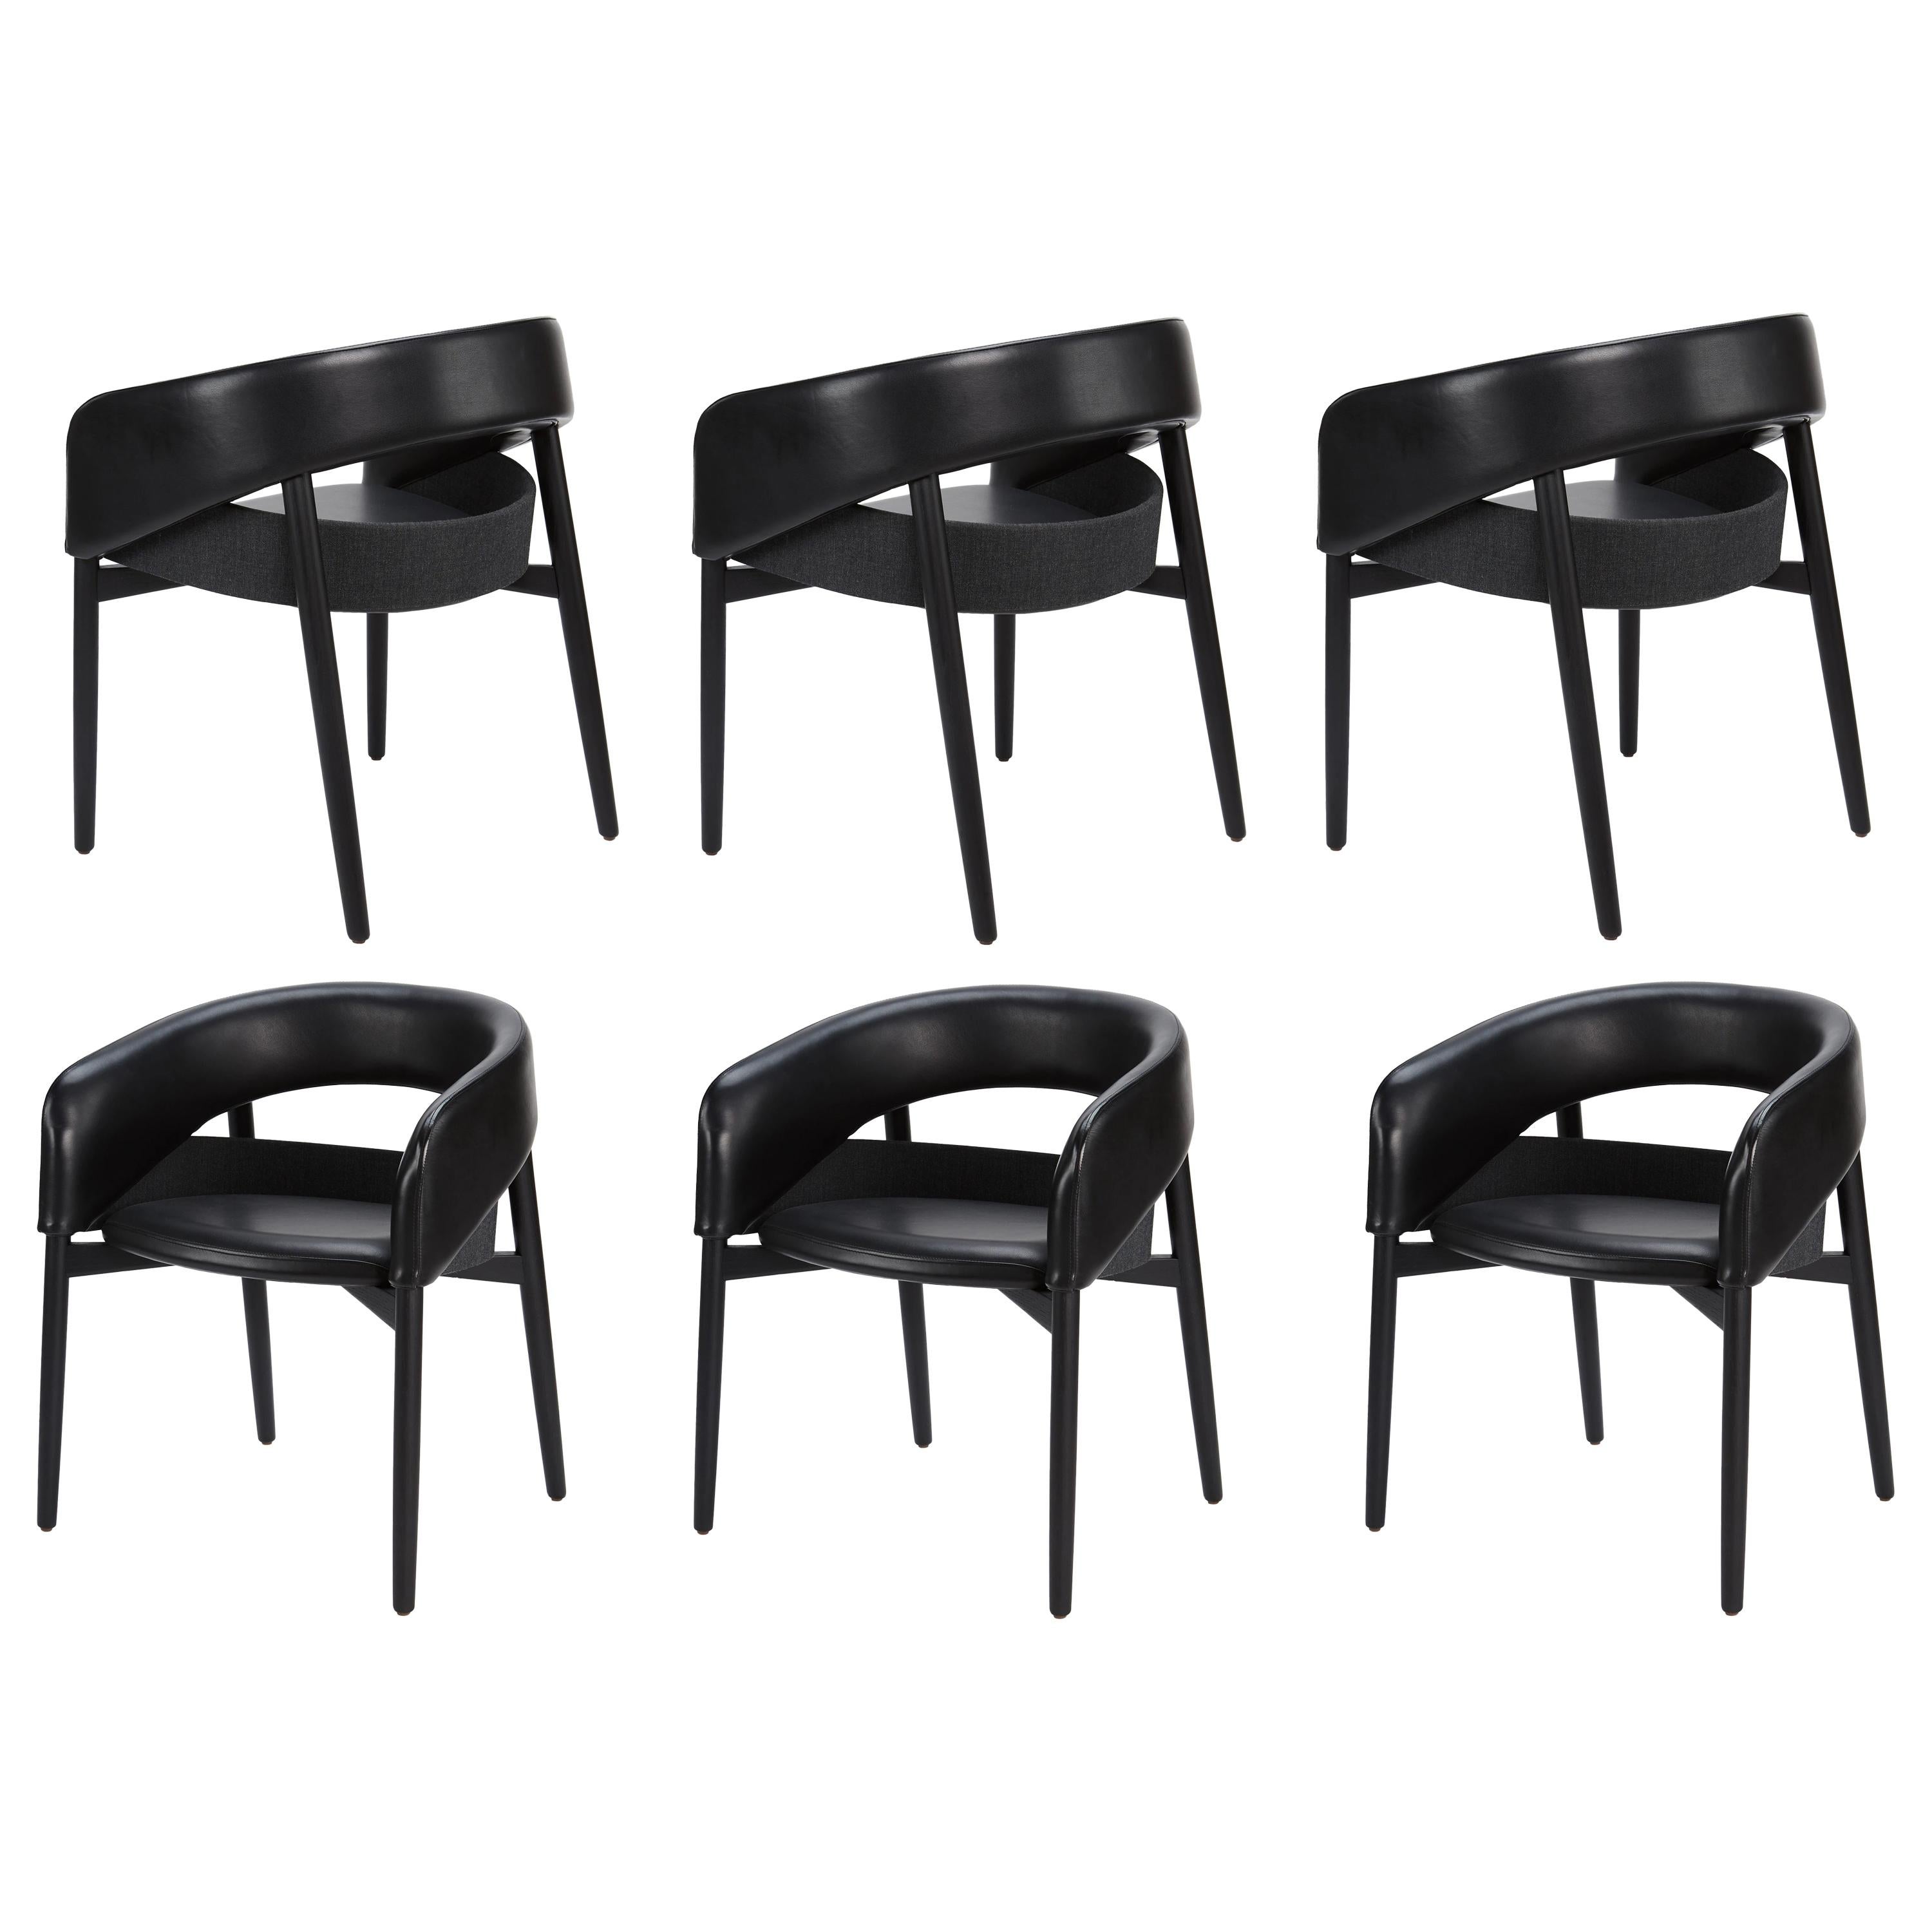 Six Contemporary Dining Chairs, Black Lacquer/Leather For Sale